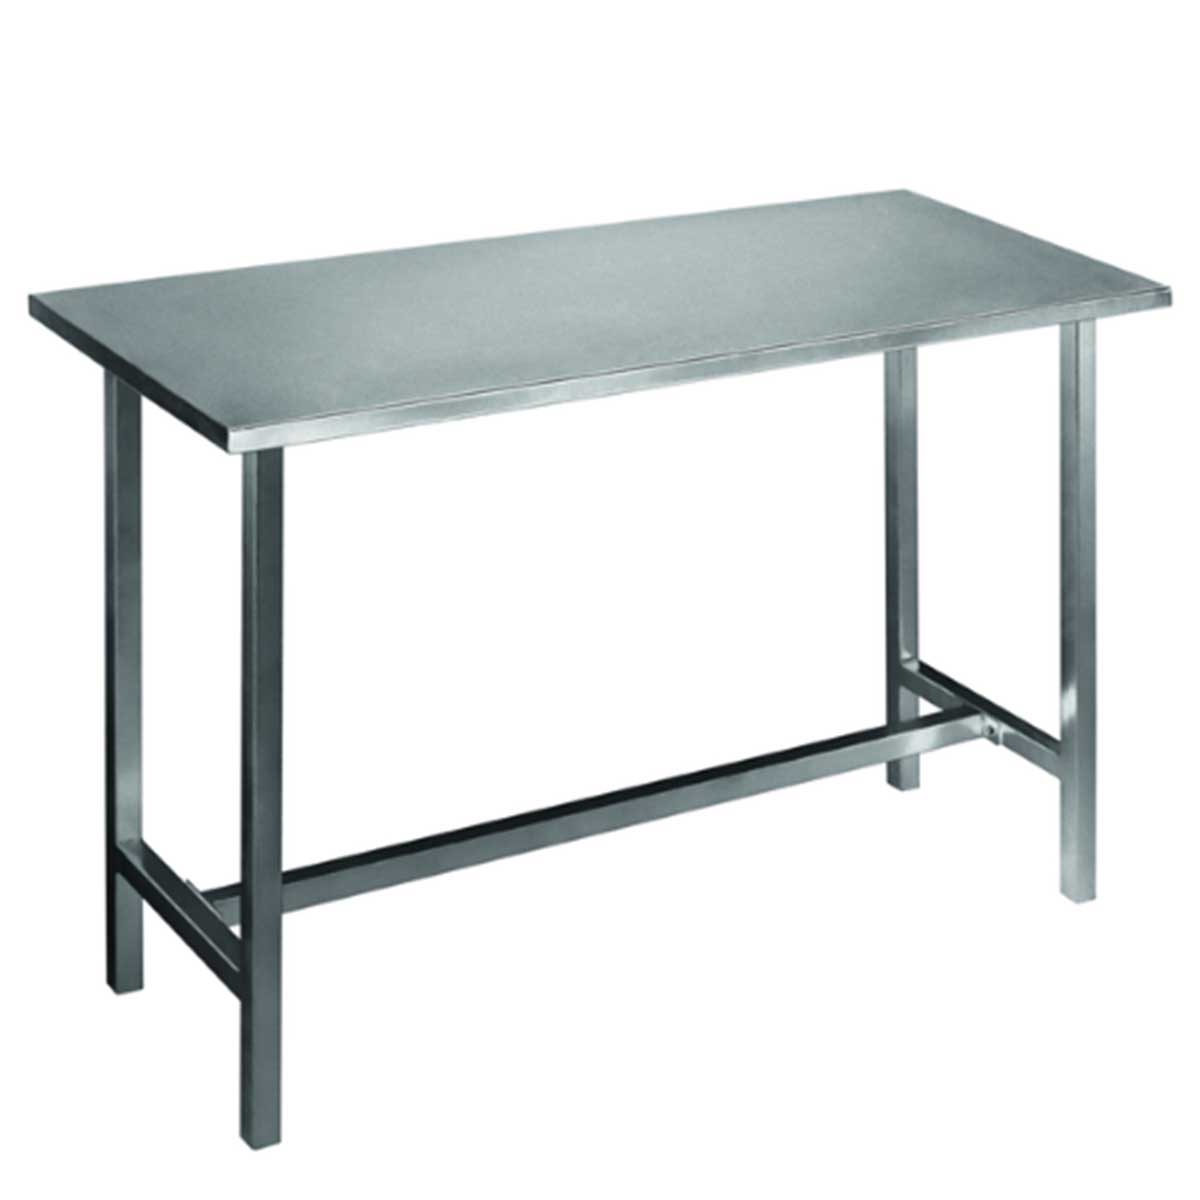 Metal Office Table Manufacturers, Suppliers in Honda Chowk